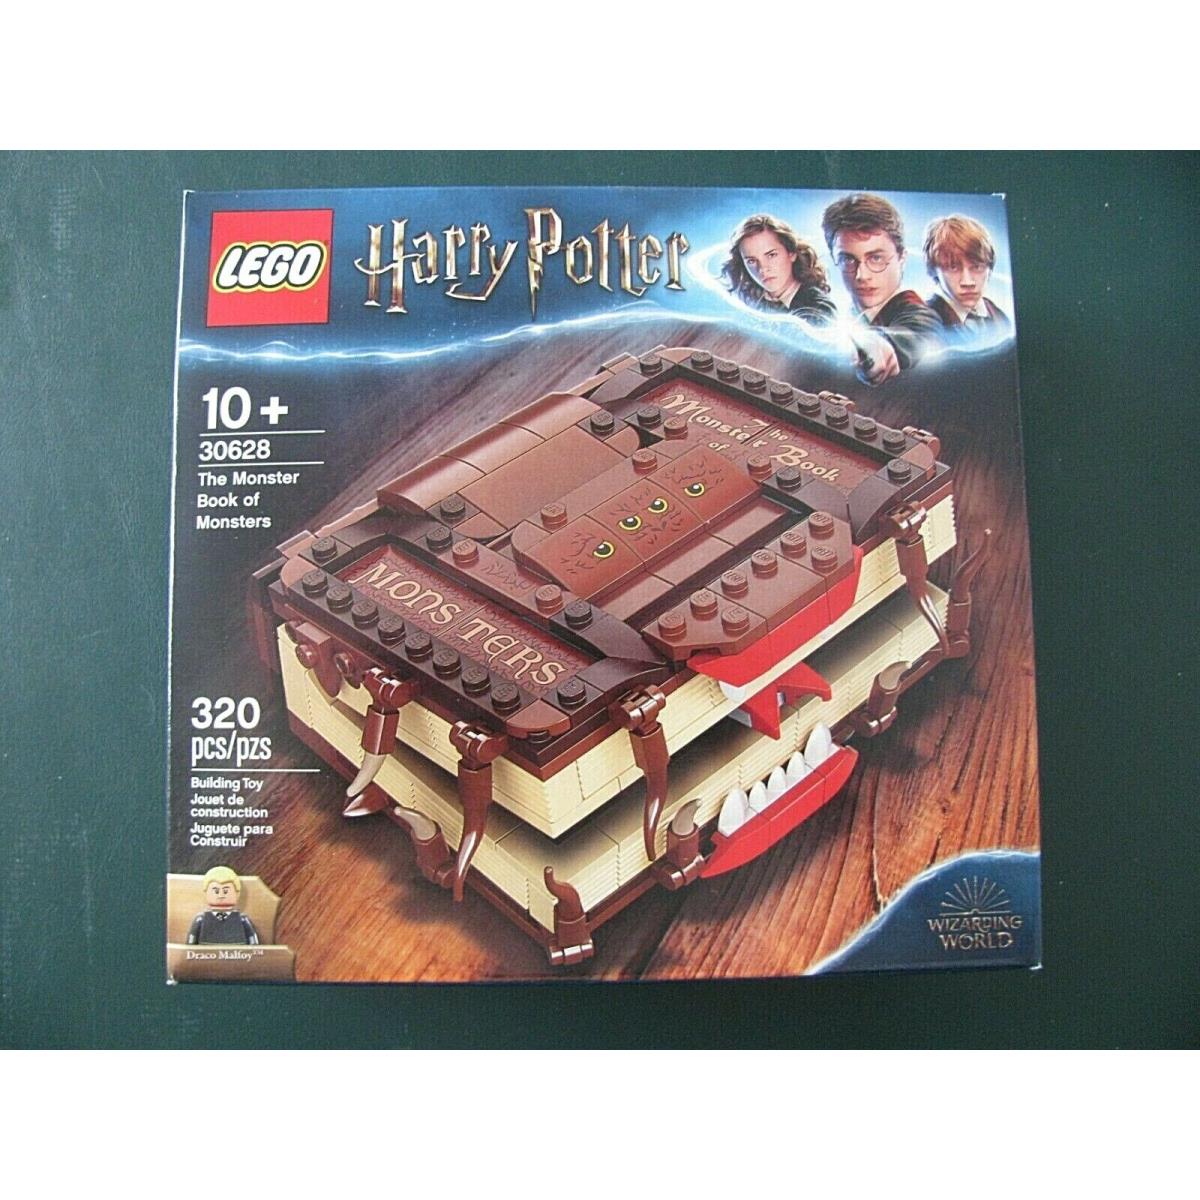 Lego 30628 Harry Potter The Monster Book OF Monsters 320 Pcs Box